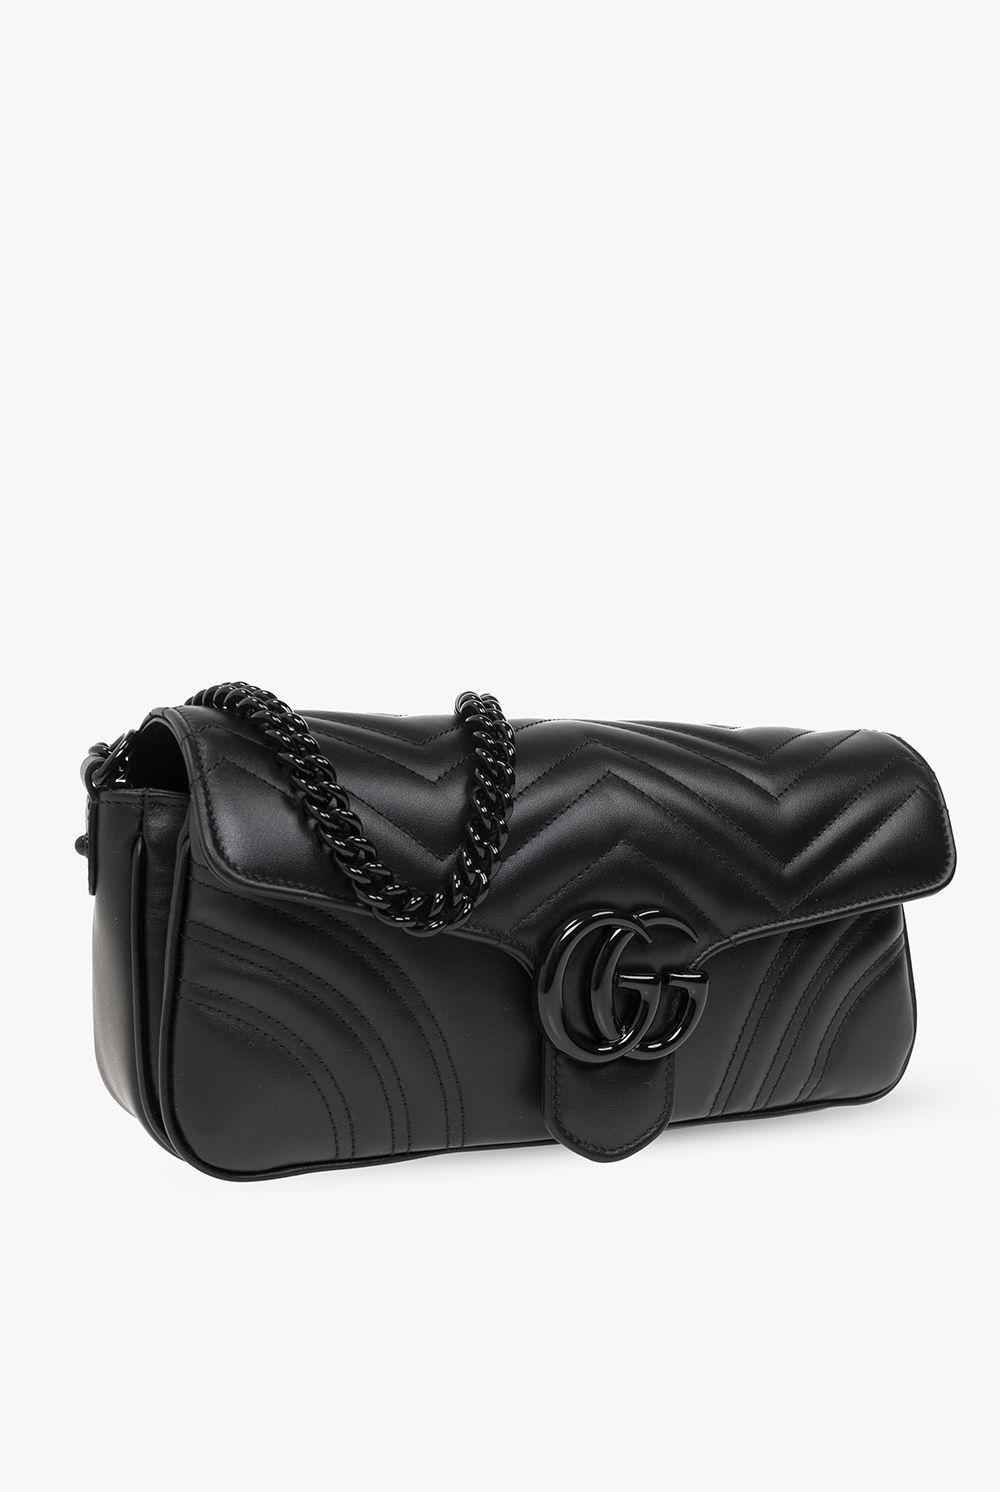 Gucci 'GG Marmont 2.0' Quilted Shoulder Bag in Black | Lyst